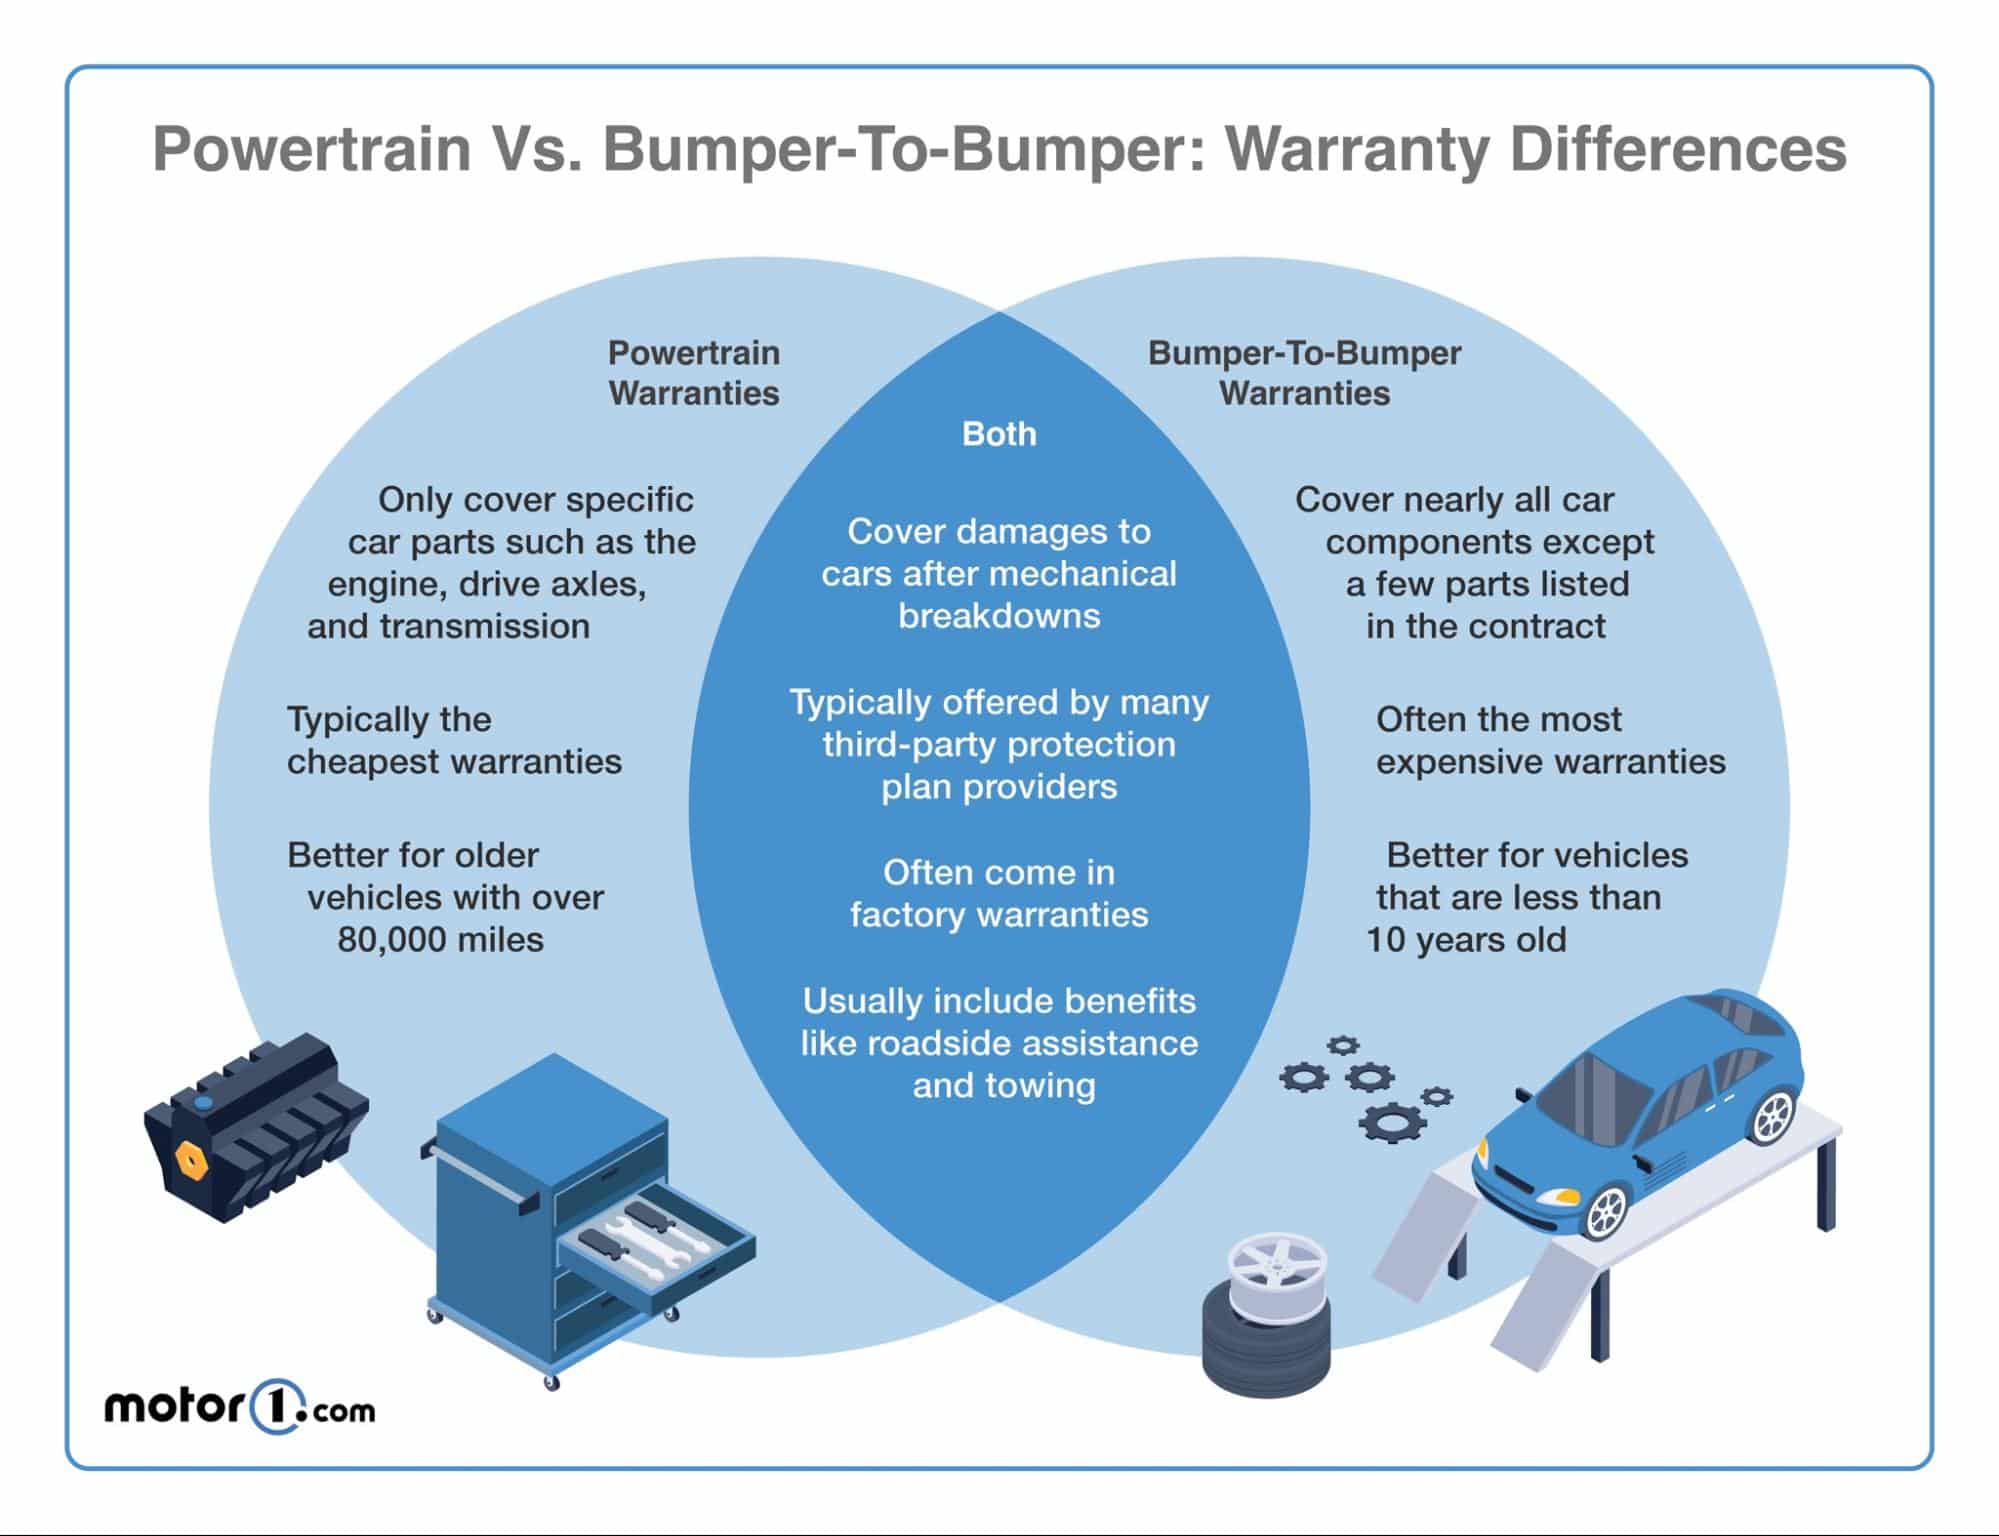 Venn diagram that shows the similarities and differences between bumper-to-bumper warranties and powertrain warranties